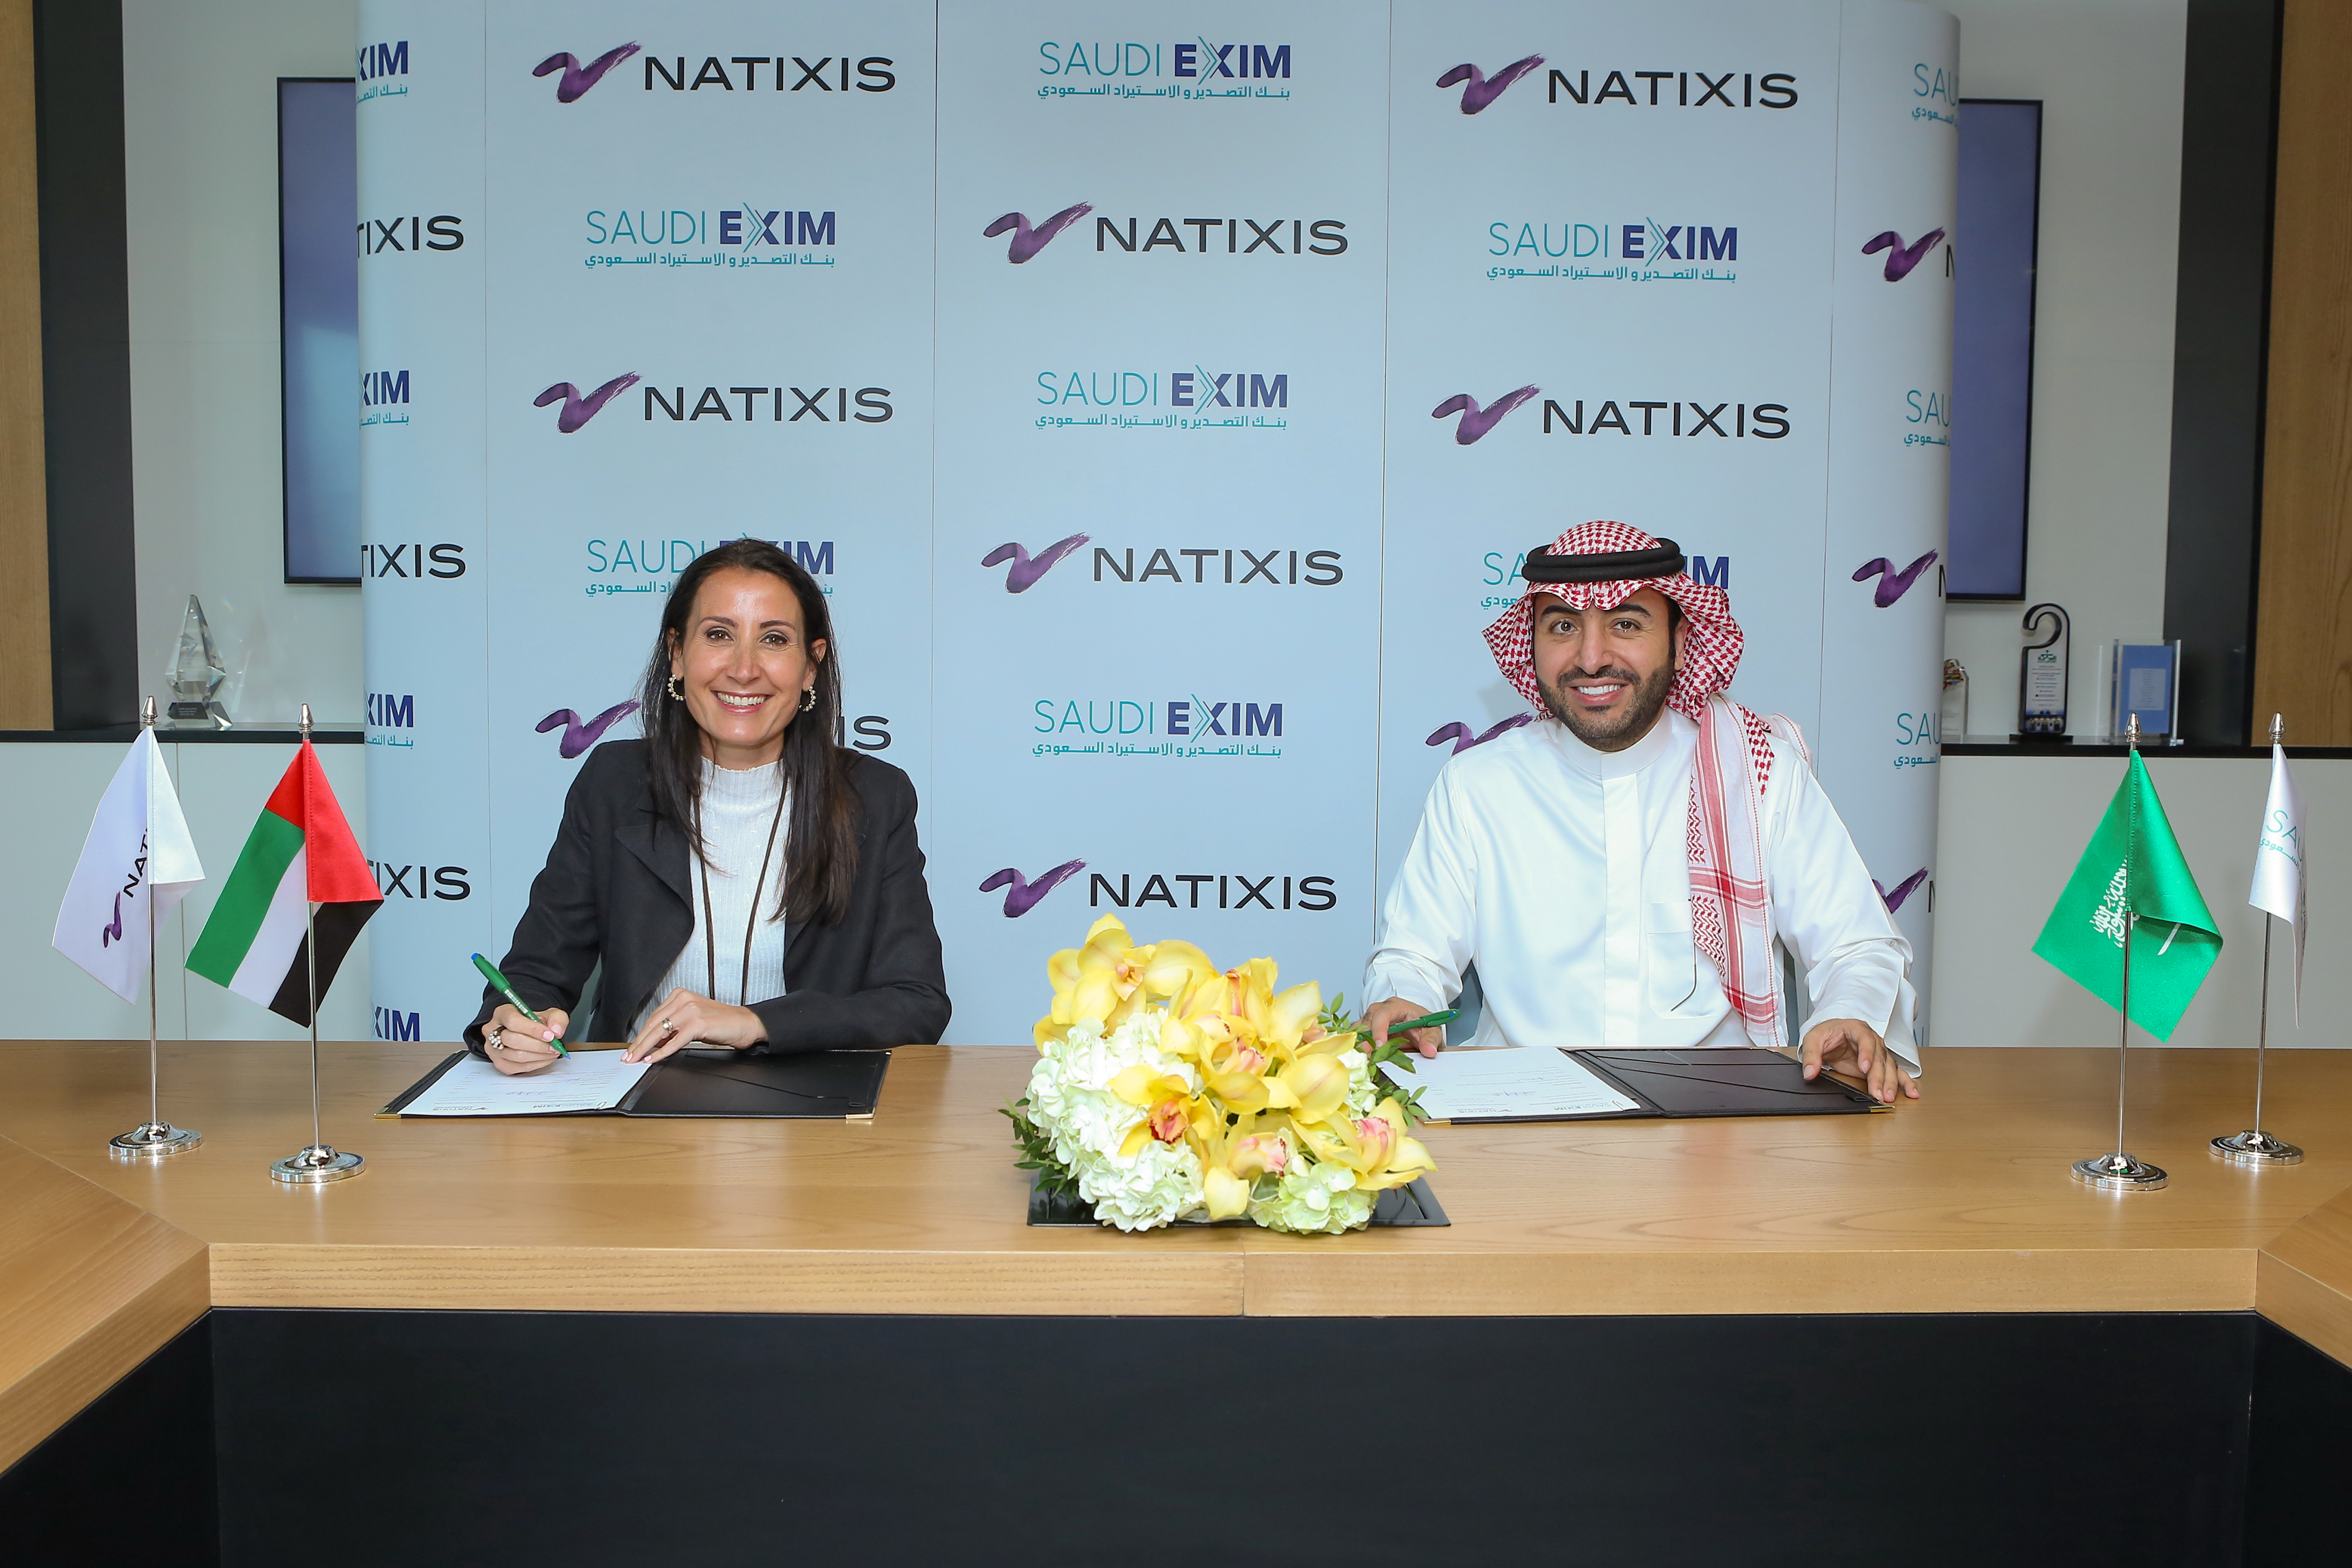 Saudi EXIM signed a memorandum of understanding with Natixis CIB for Banking Services